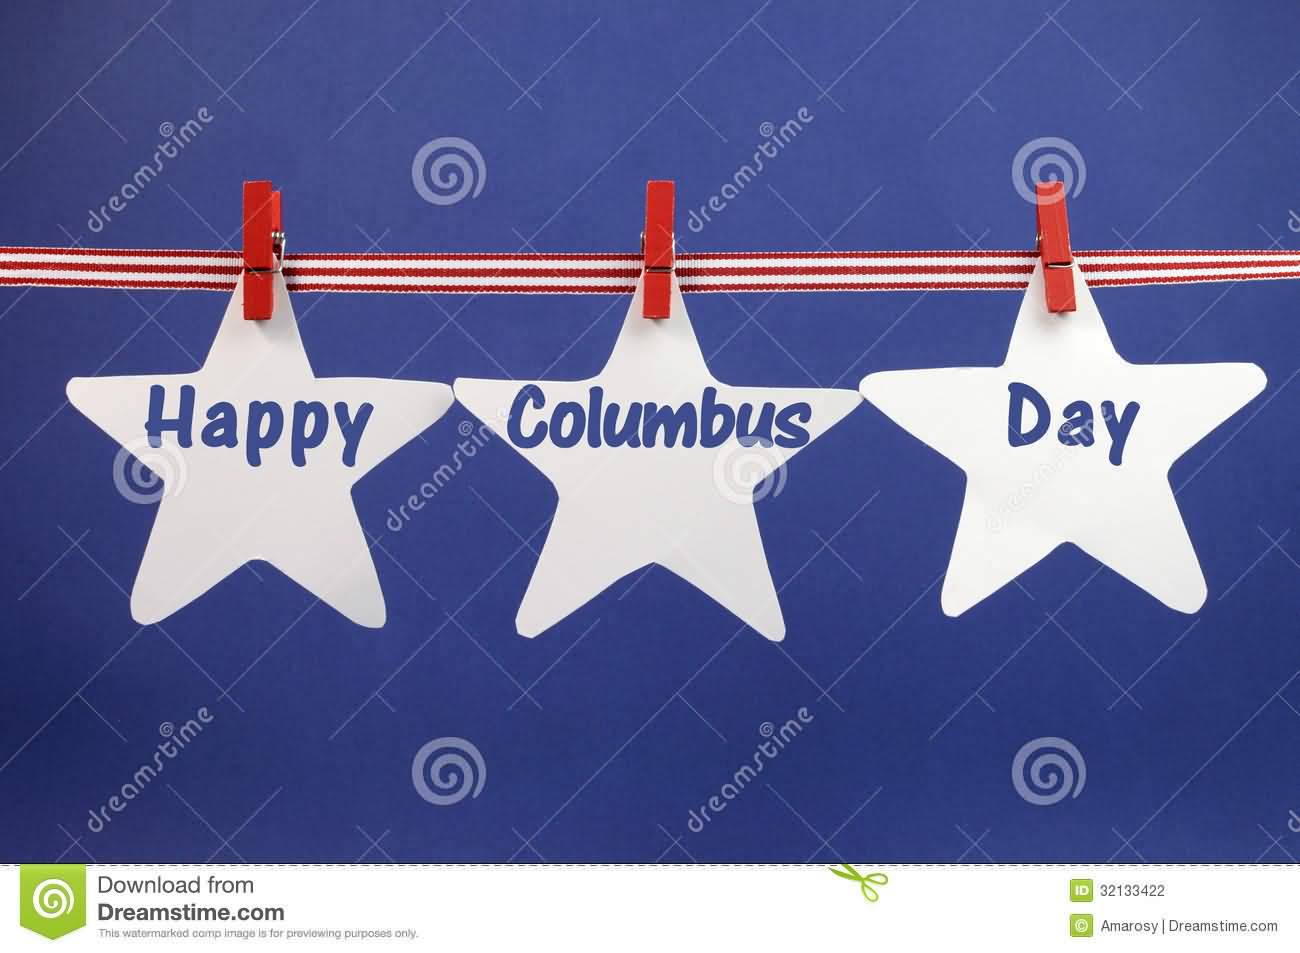 Happy Columbus Day 2016 Greetings Written On White Stars Hanging On Red Stripes